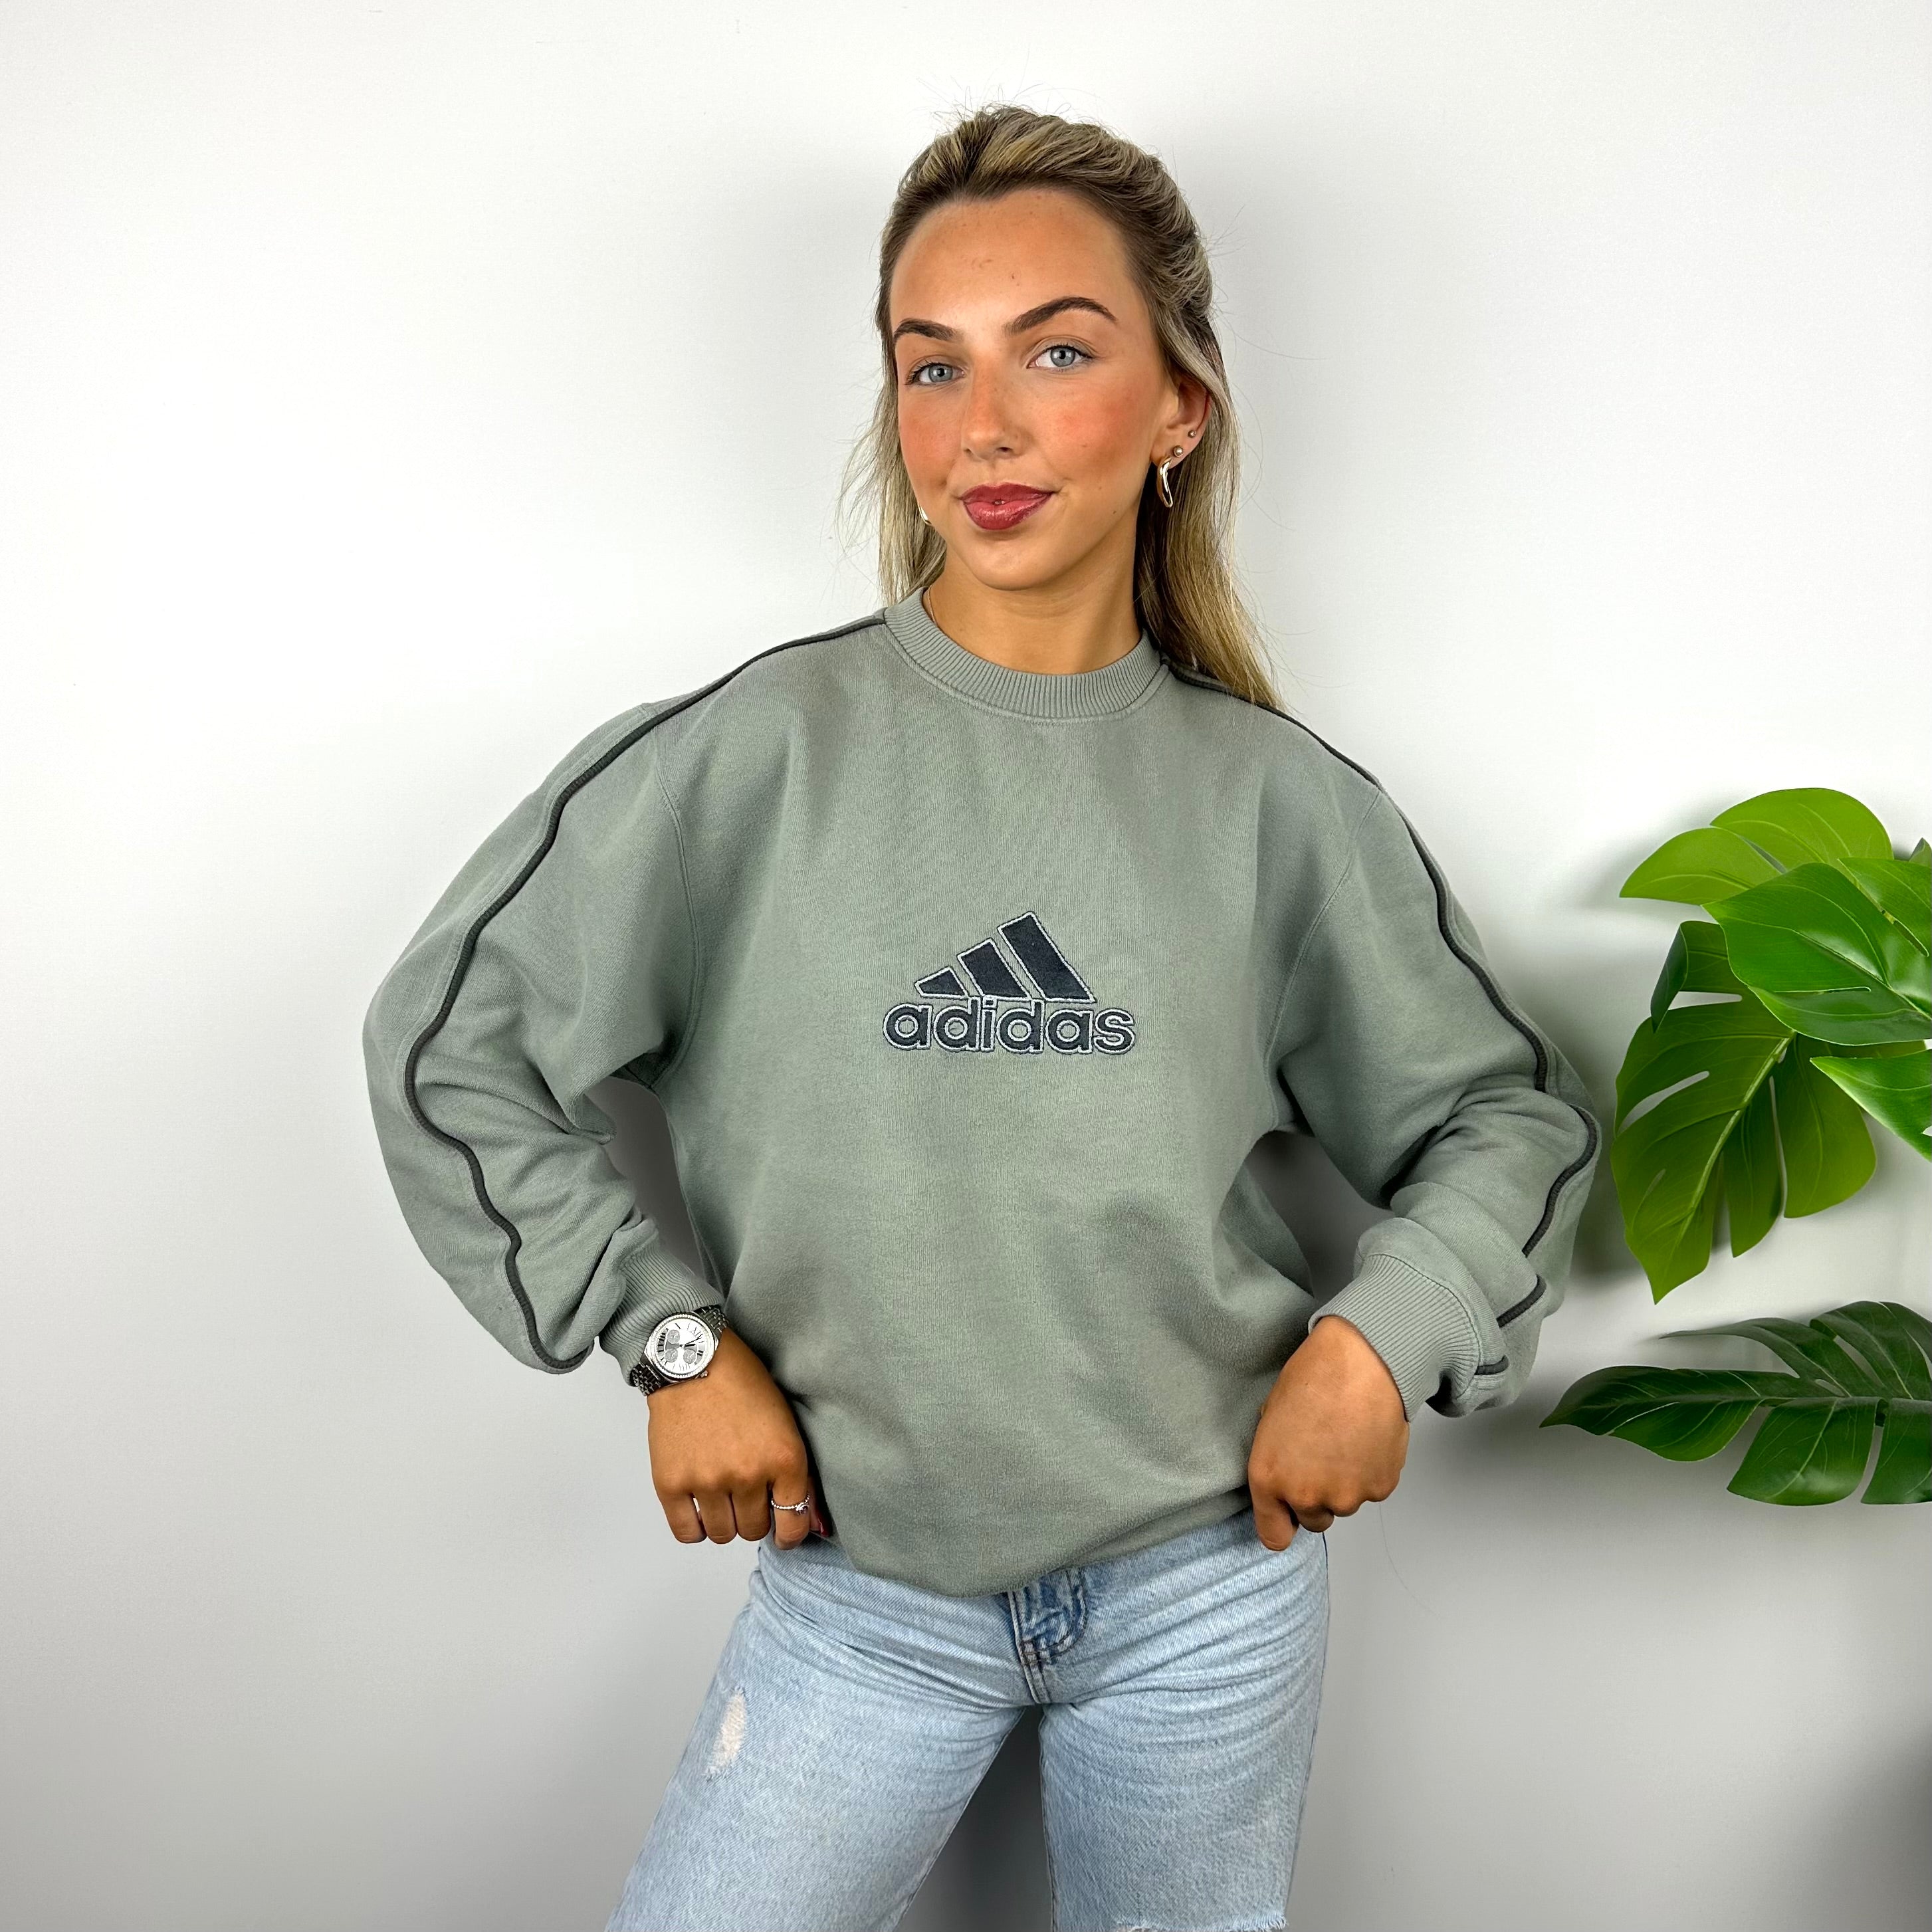 Adidas Sea Green Embroidered Spell Out Sweatshirt (M)